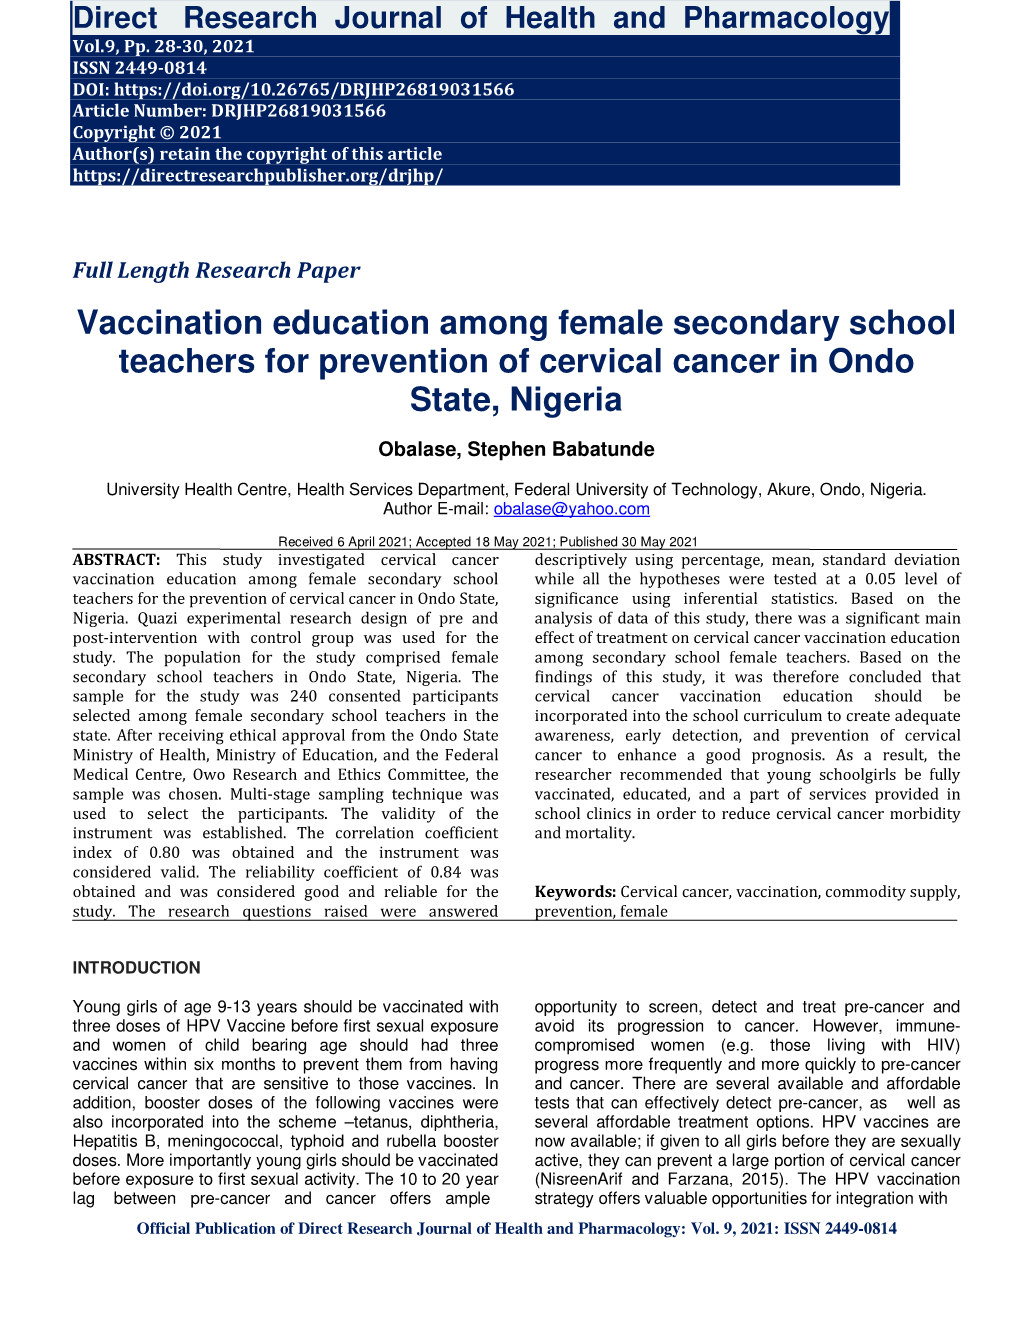 Vaccination Education Among Female Secondary School Teachers for Prevention of Cervical Cancer in Ondo State, Nigeria